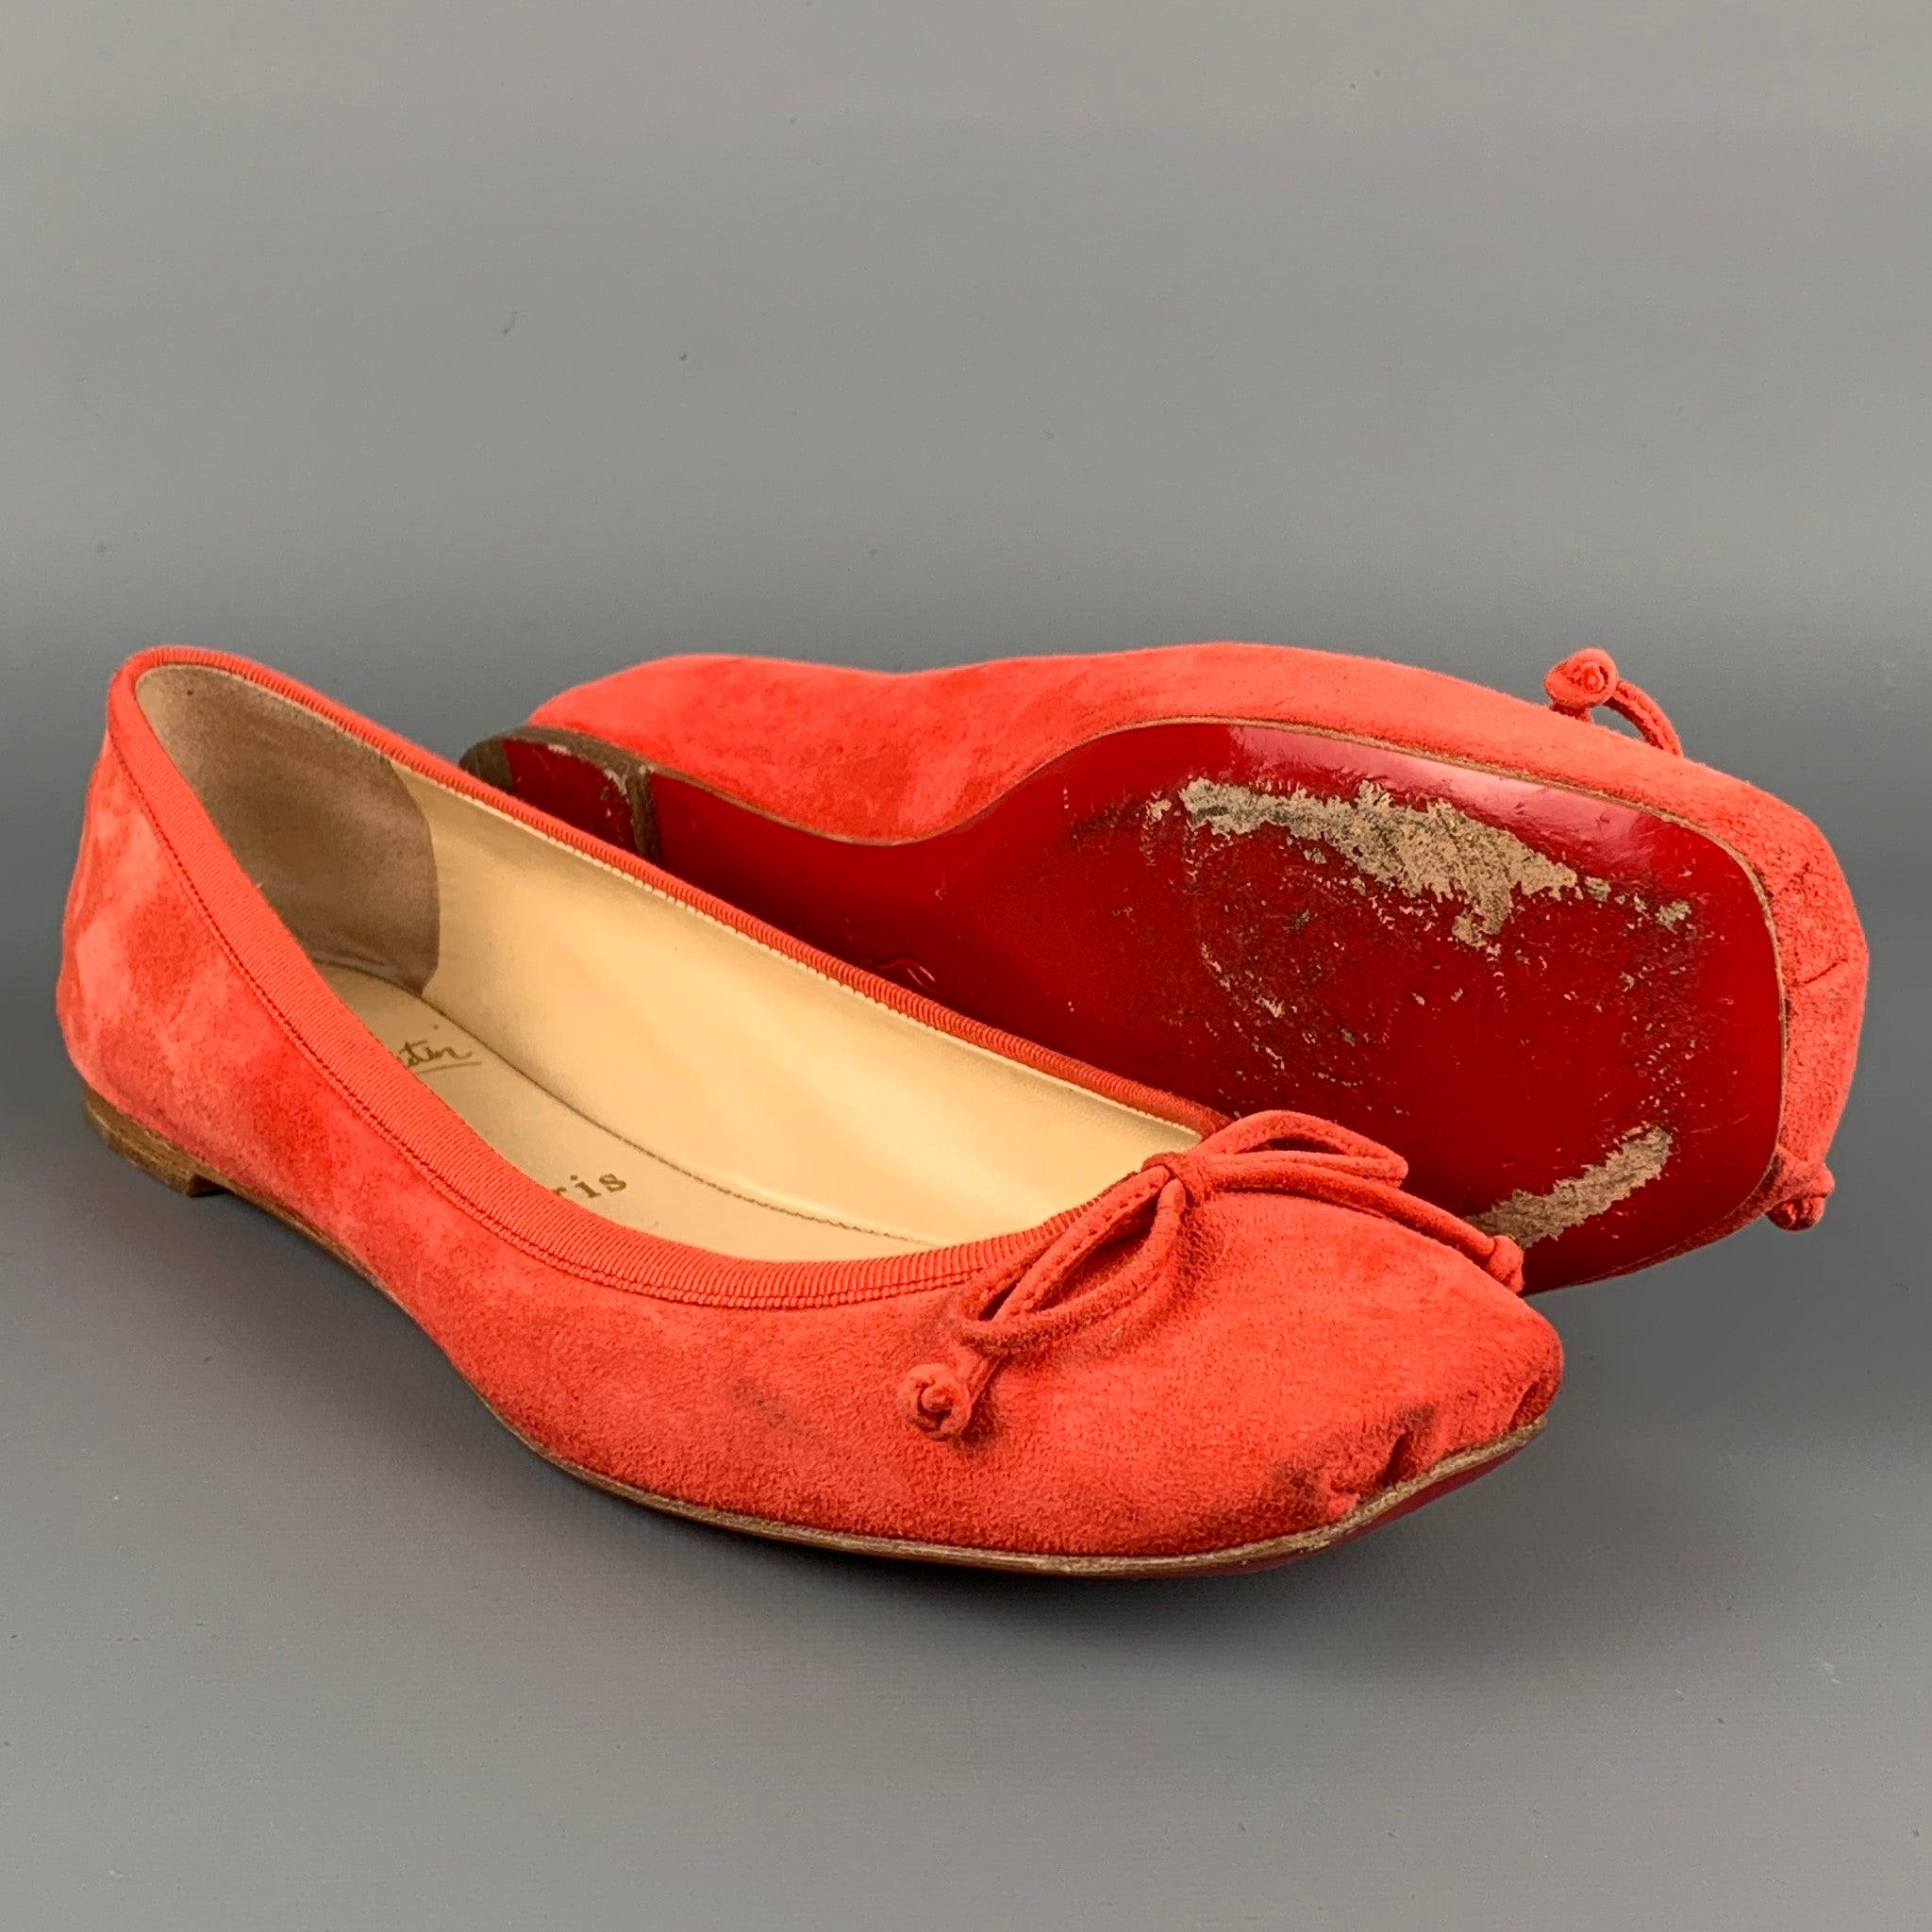 CHRISTIAN LOUBOUTIN Size 6.5 Coral Suede Ballet Flats In Good Condition For Sale In San Francisco, CA